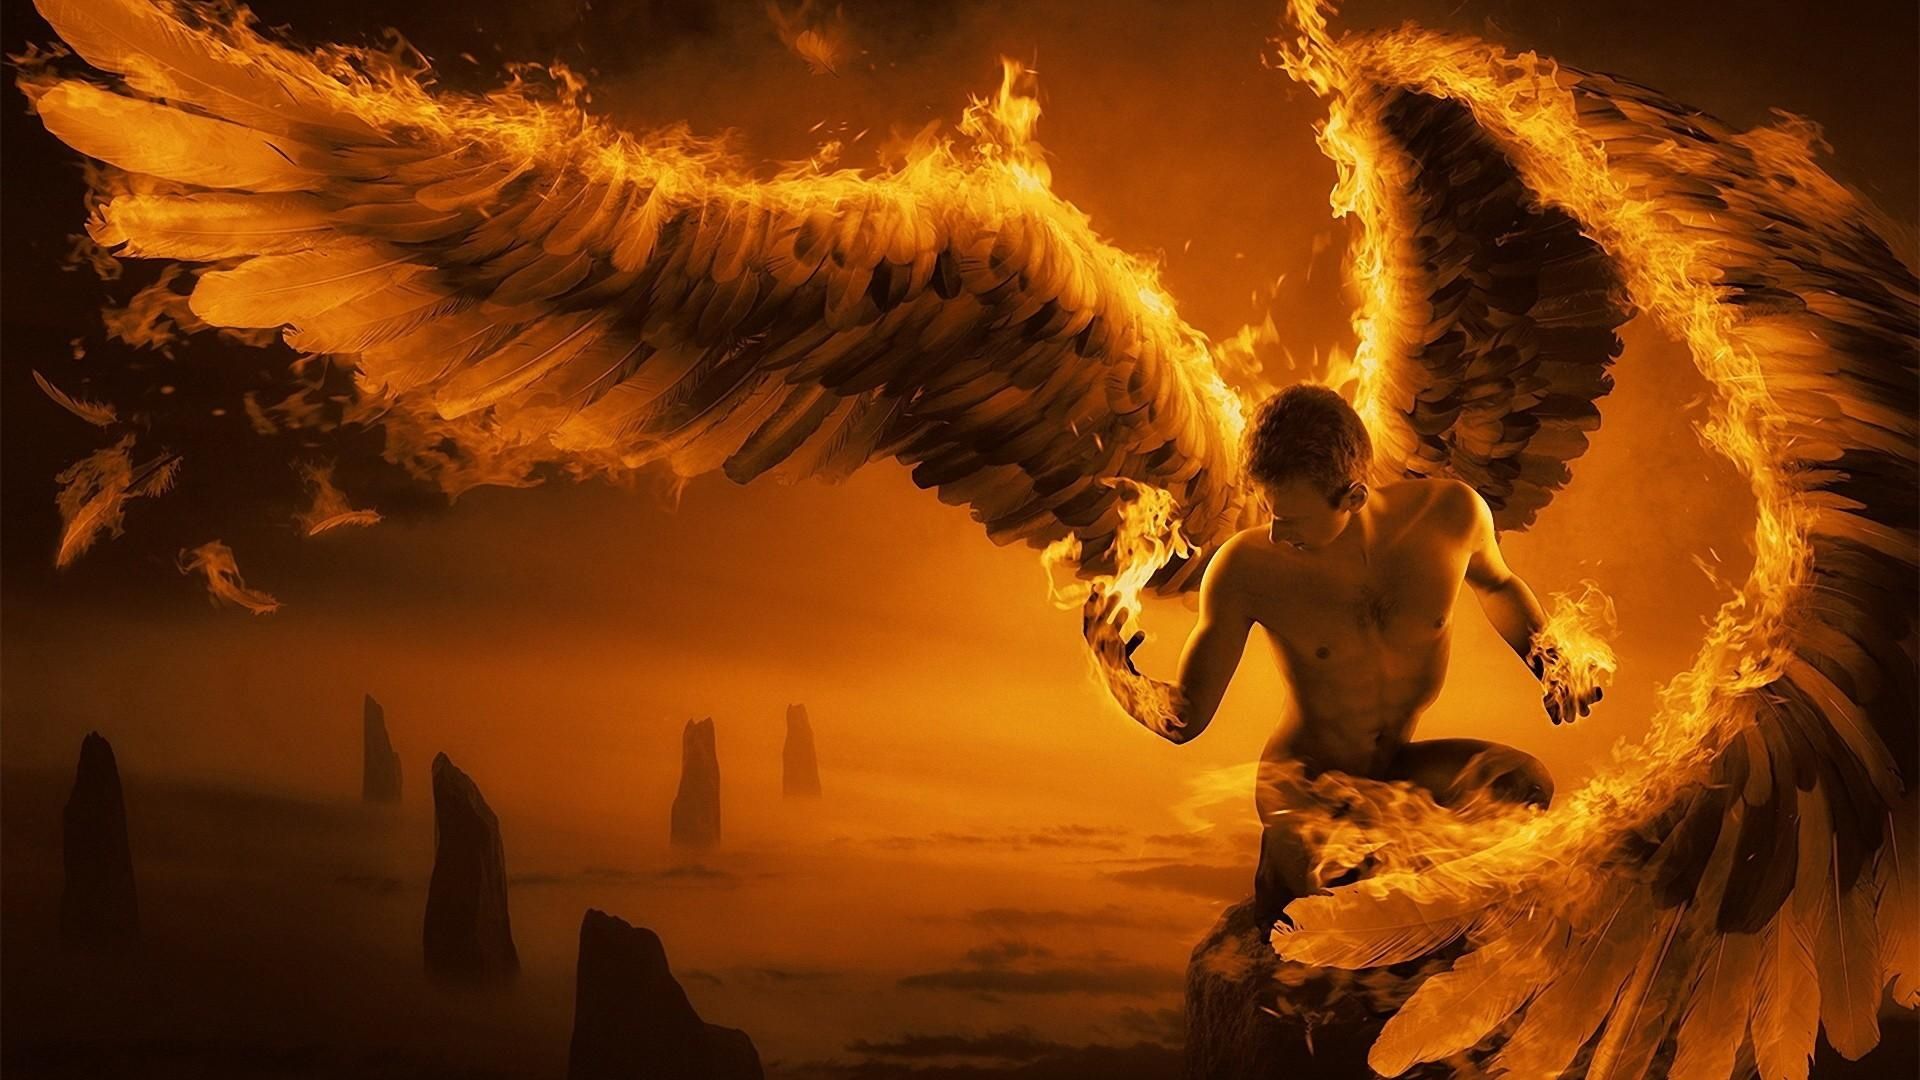 Angels Wallpapers HD Group (71+)